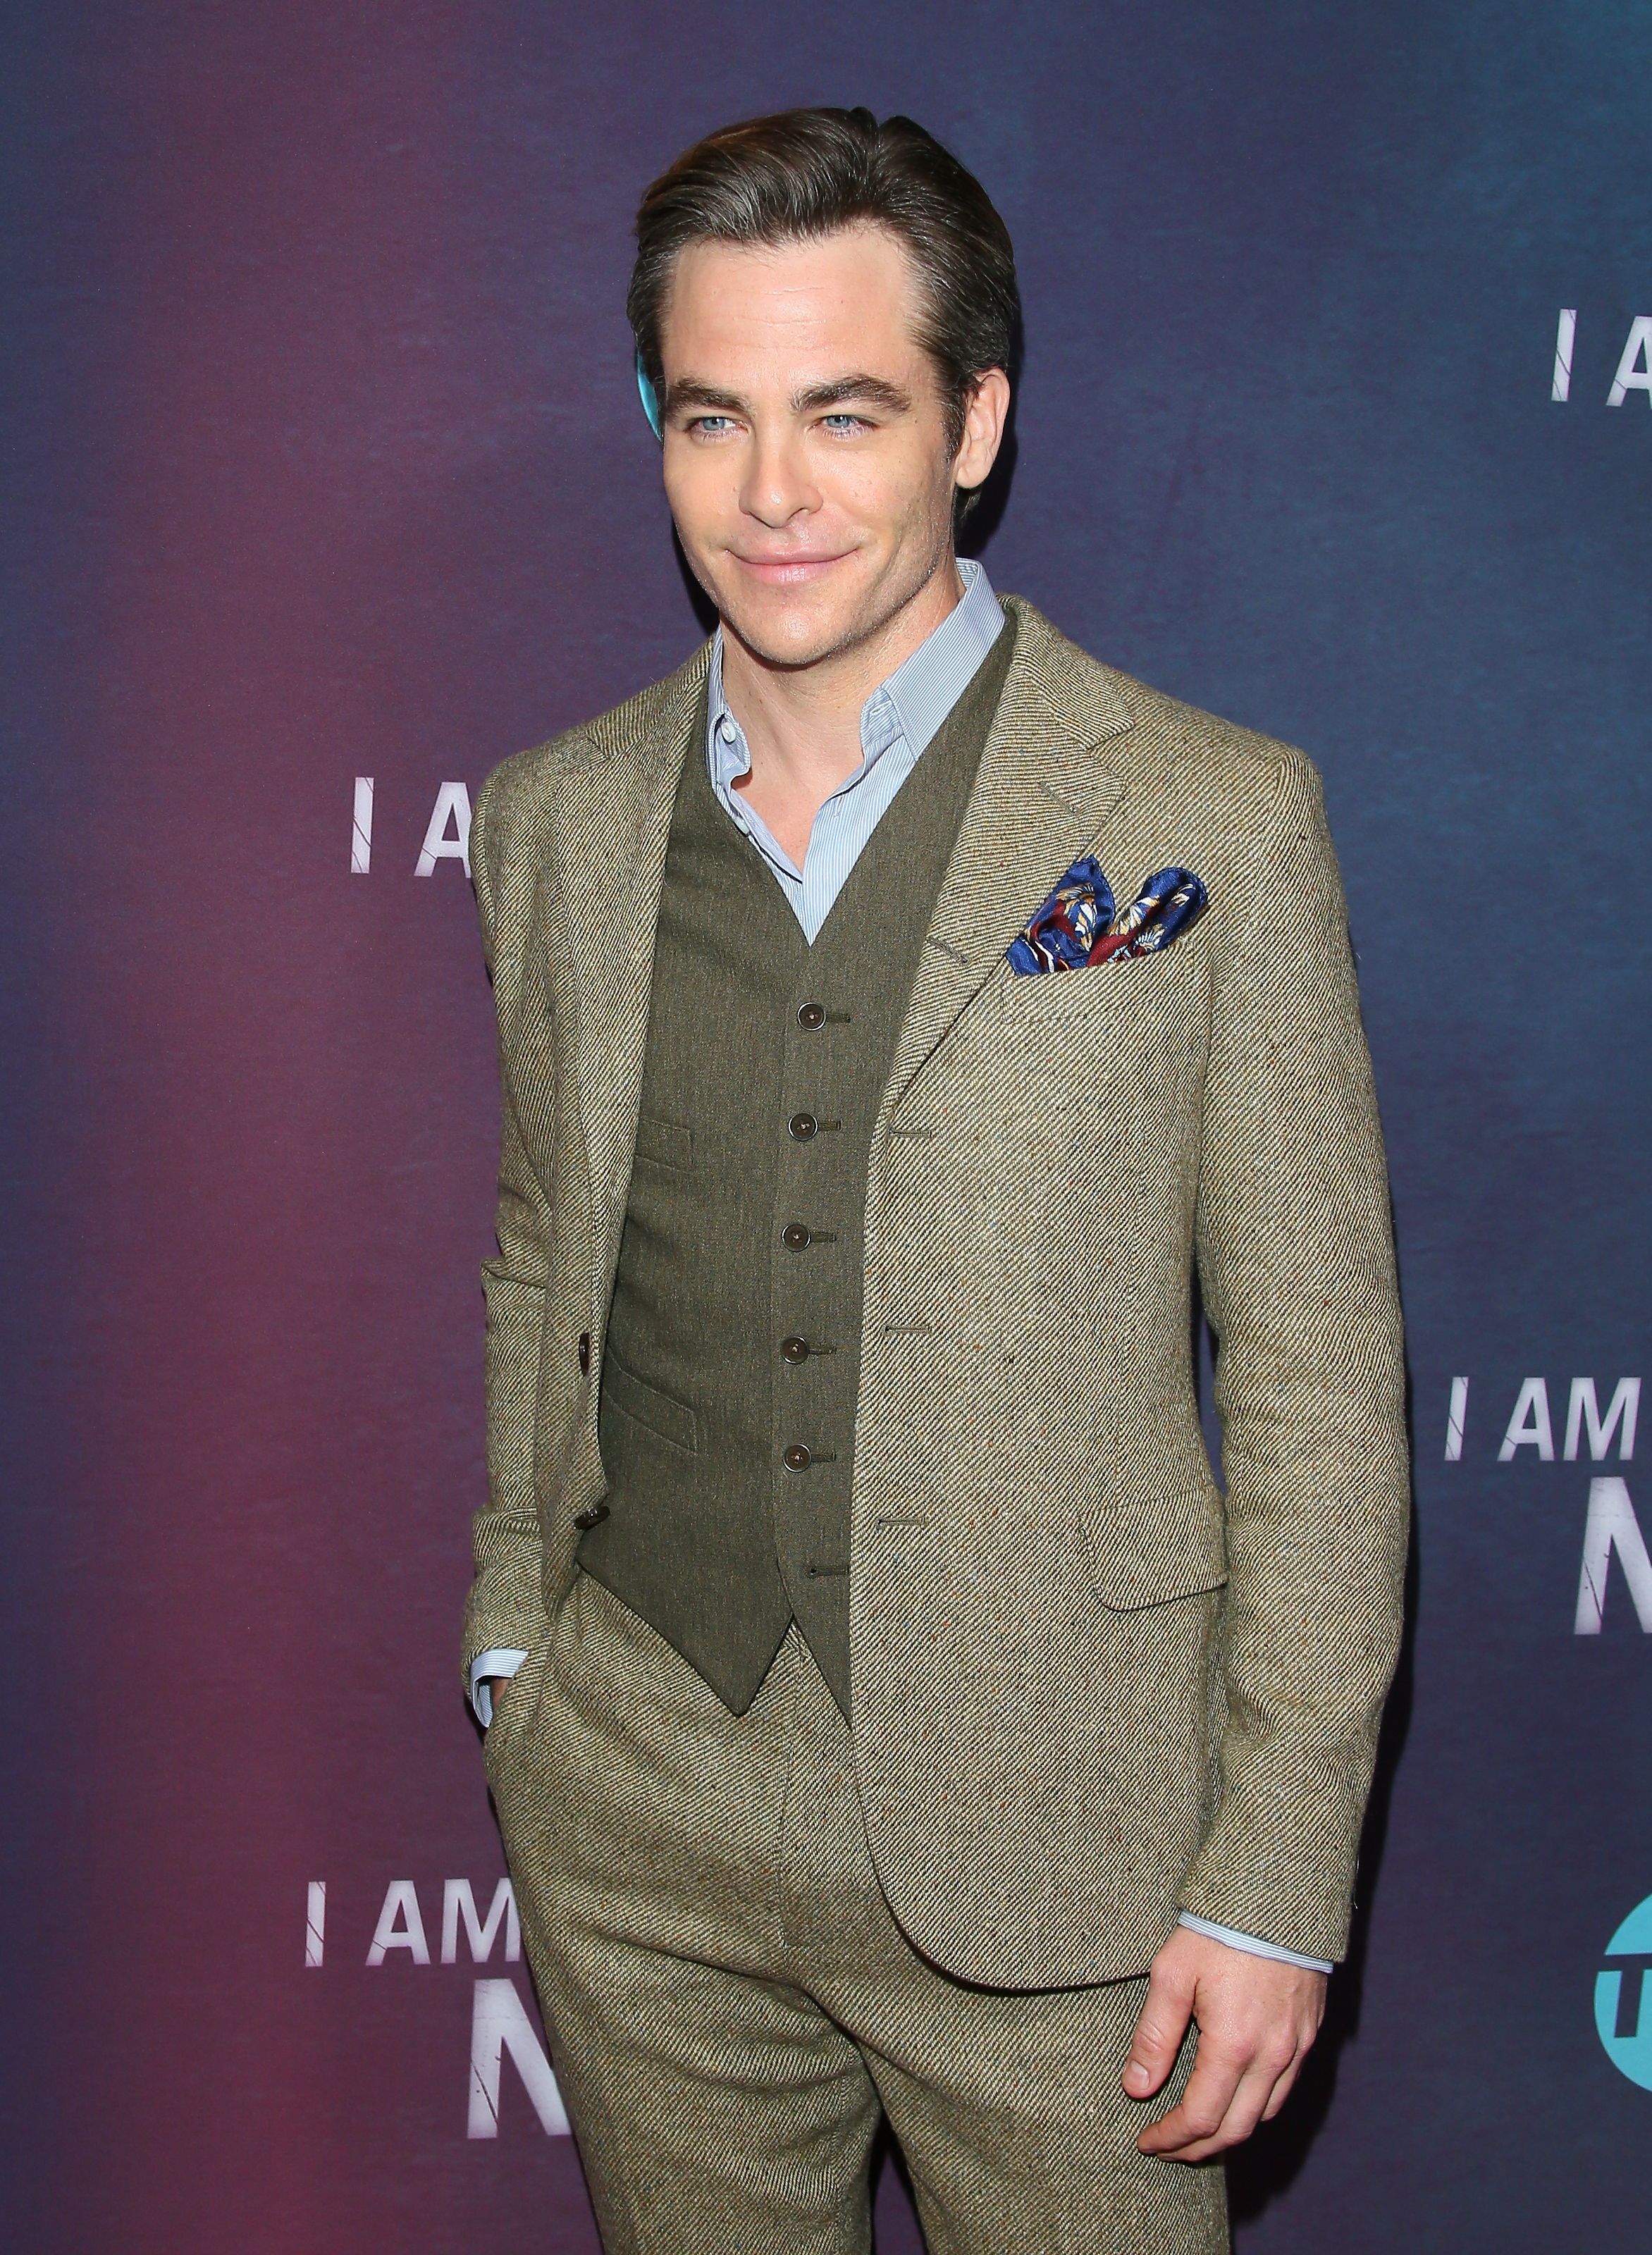 Chris Pine during the premiere of TNT's 'I Am The Night' at Harmony Gold on January 24, 2019, in Los Angeles, California. | Source: Getty Images